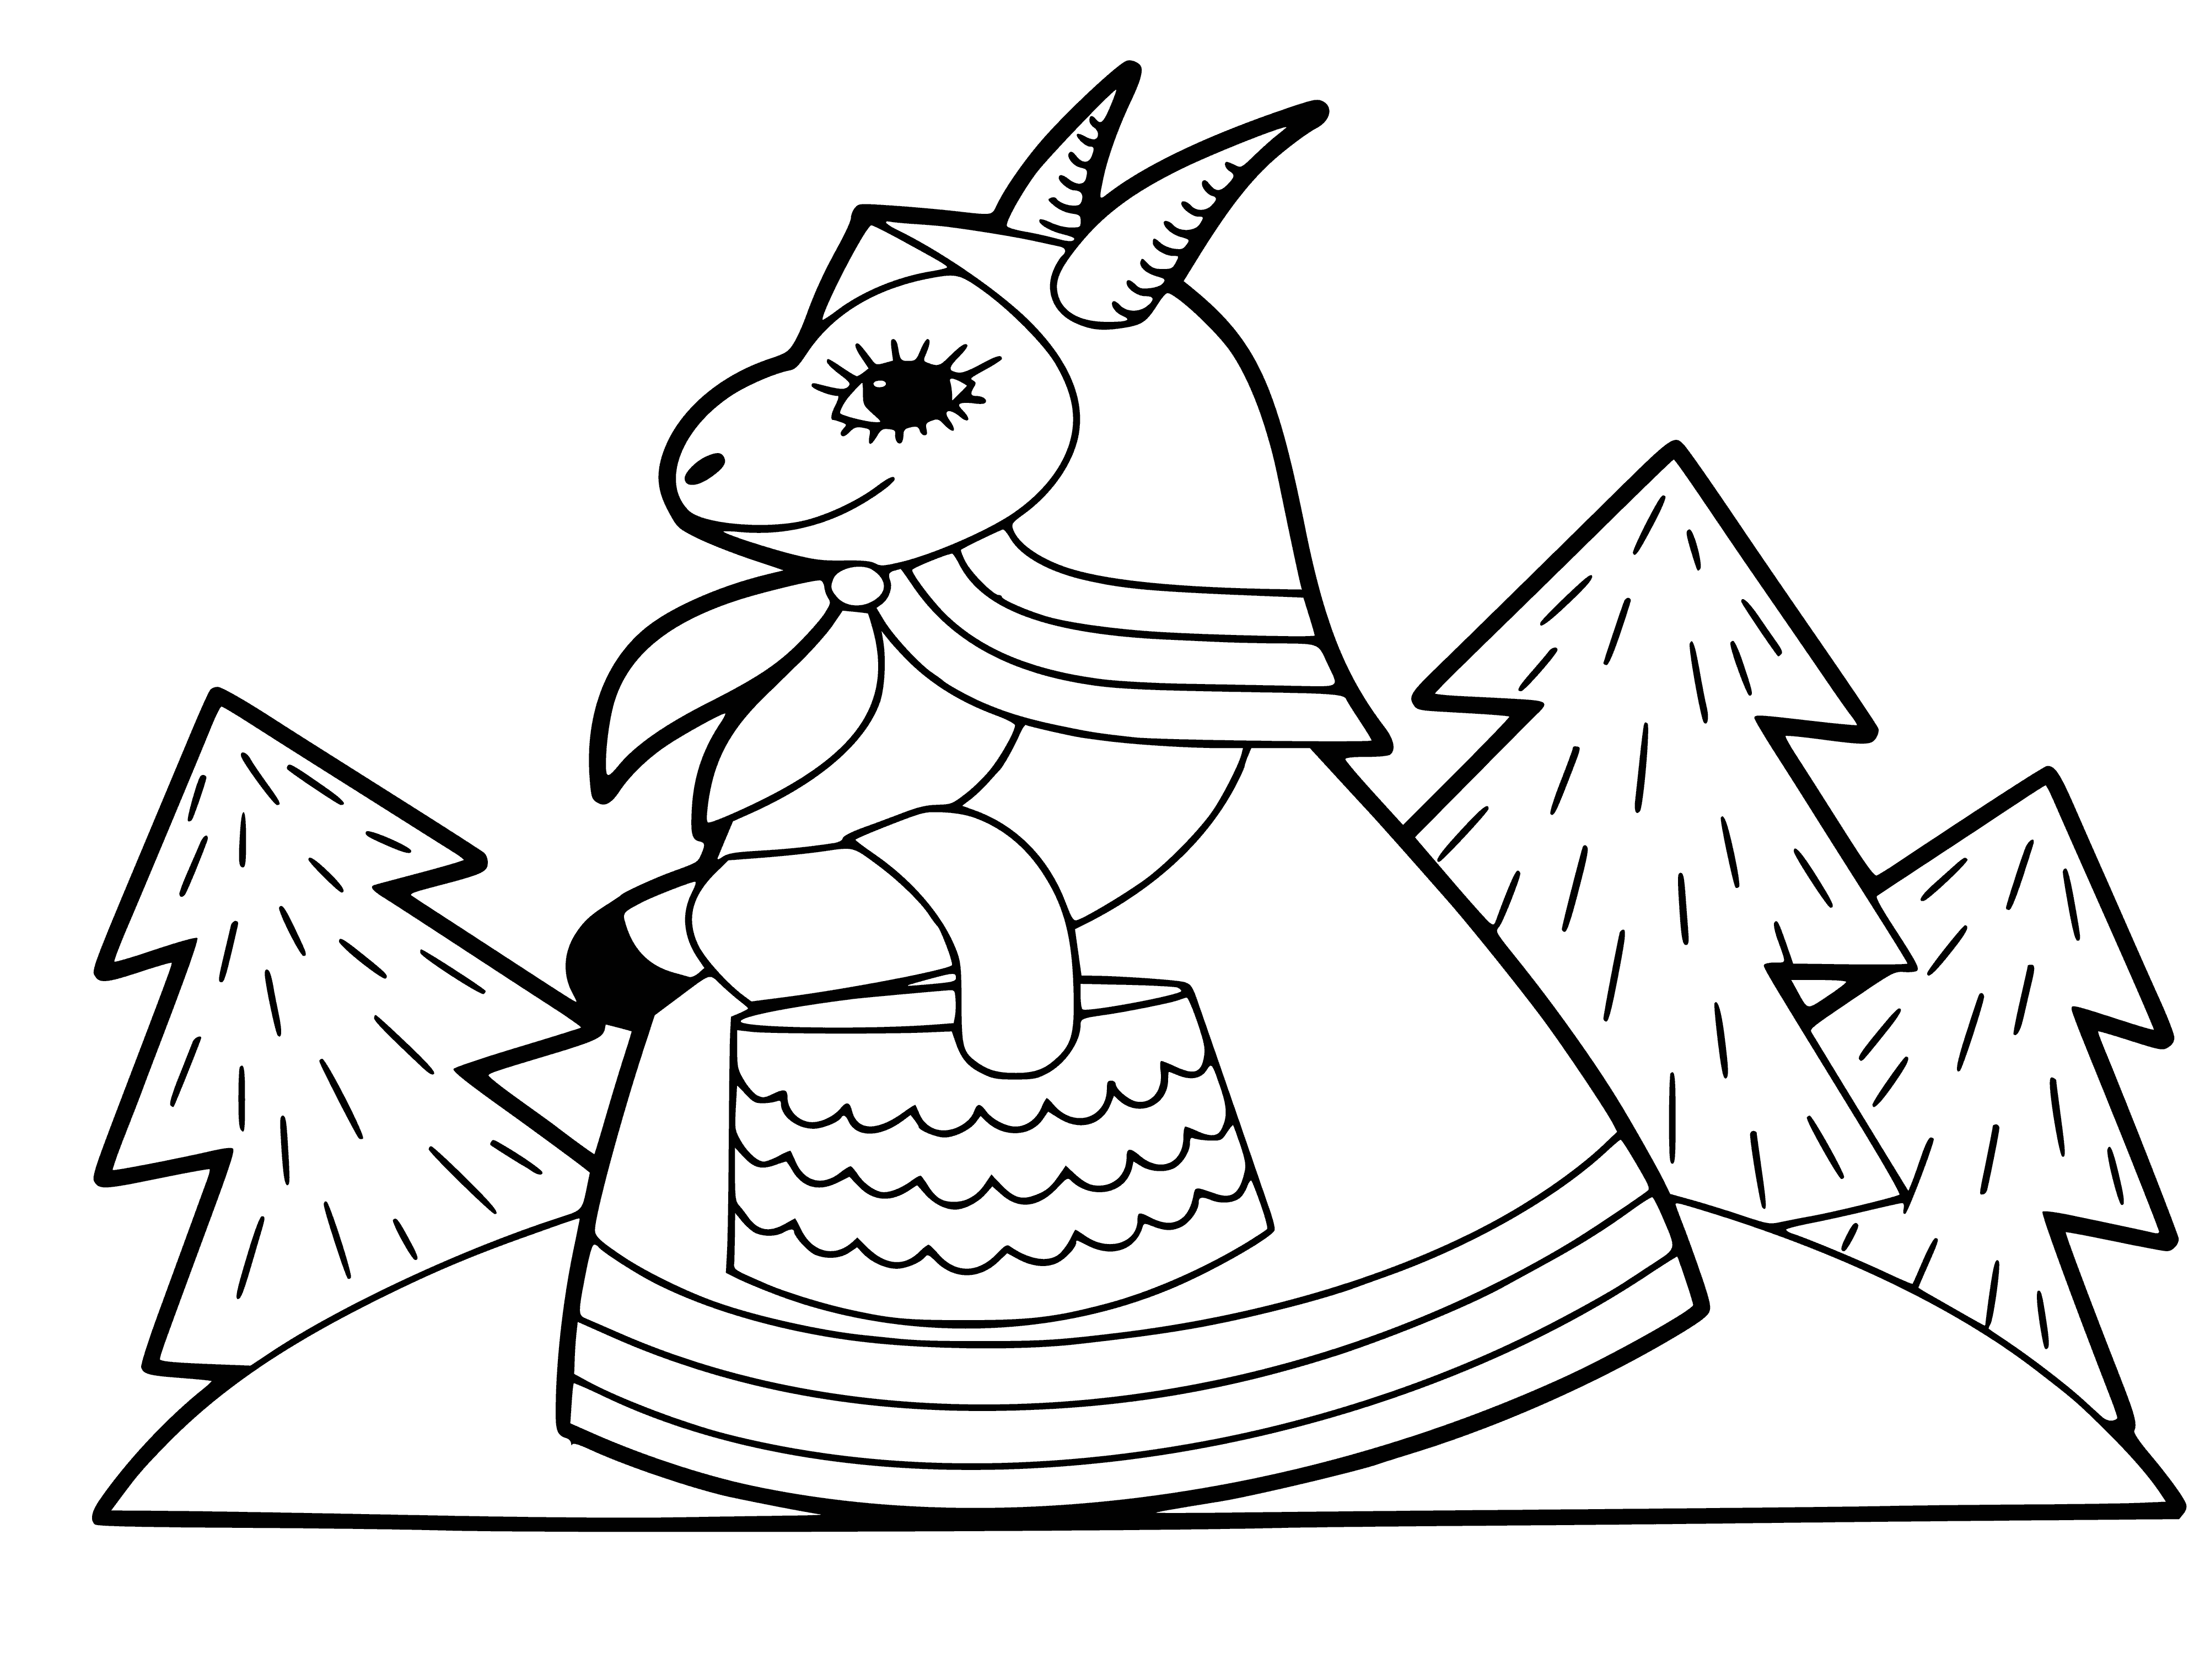 coloring page: A white goat with black spots grazes on a hill with a lofty head, thick soft fur, and a long tail.